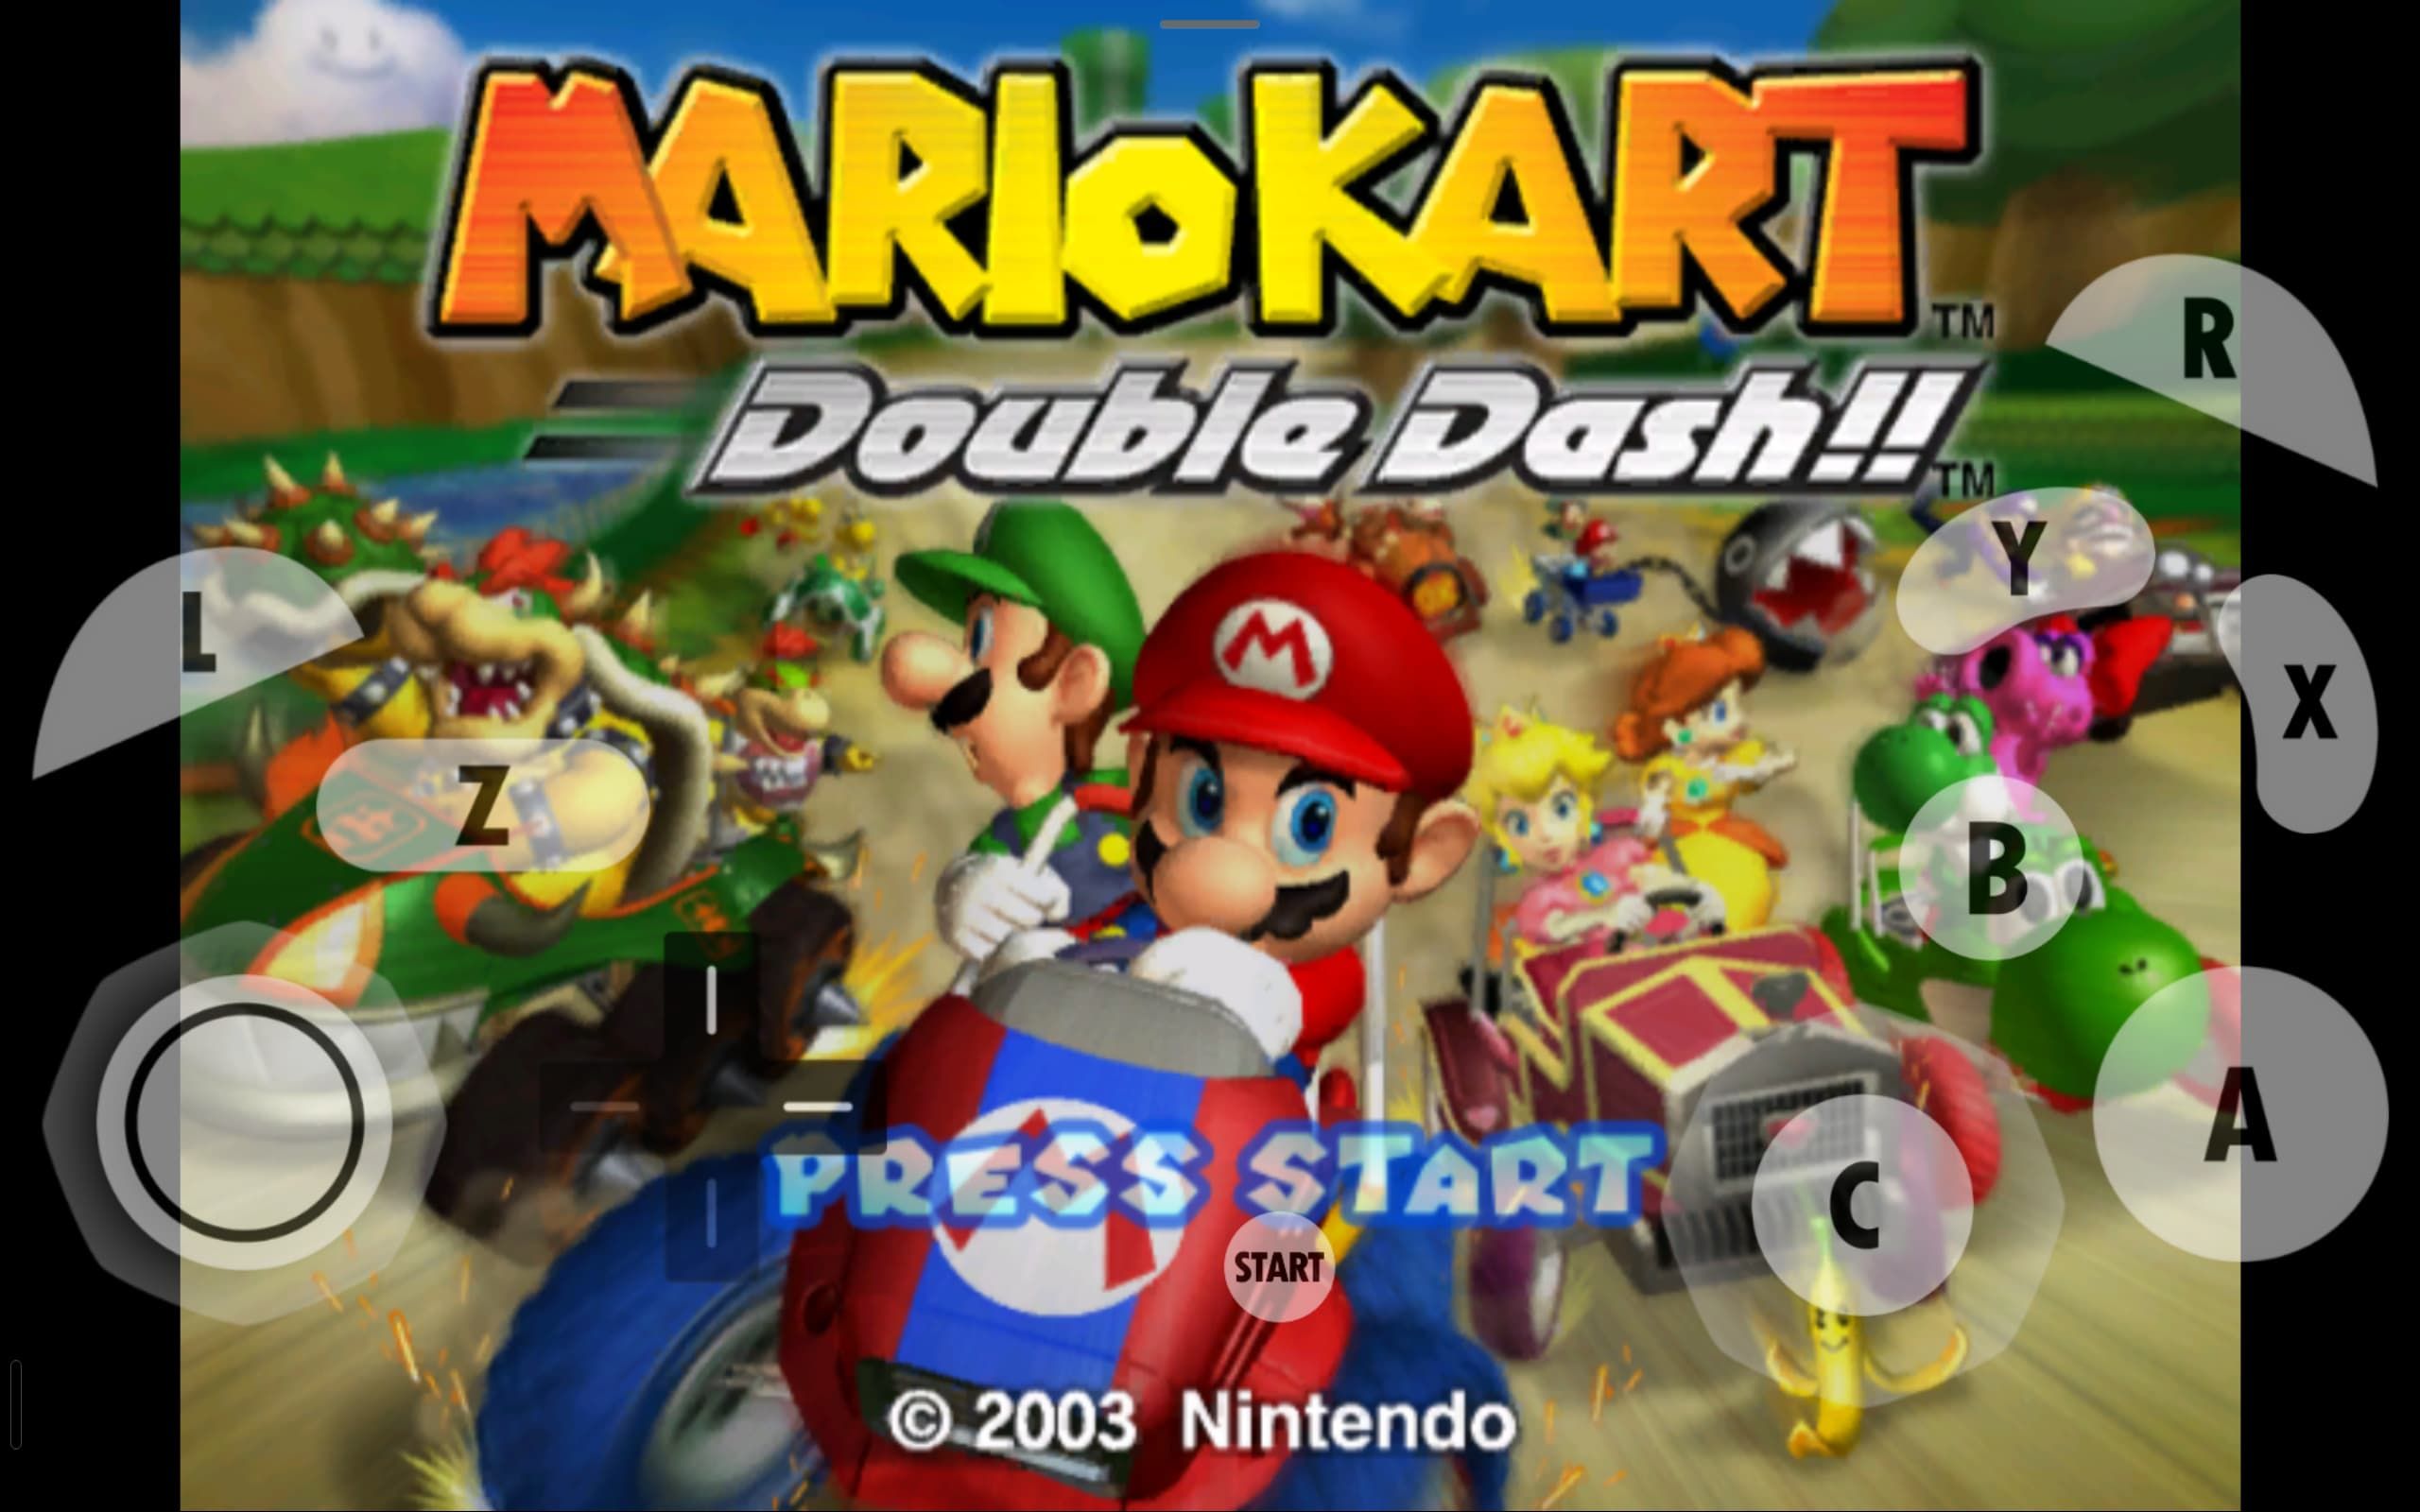 A screenshot of Mario Kart main screen on Dolphin emulator for Android.